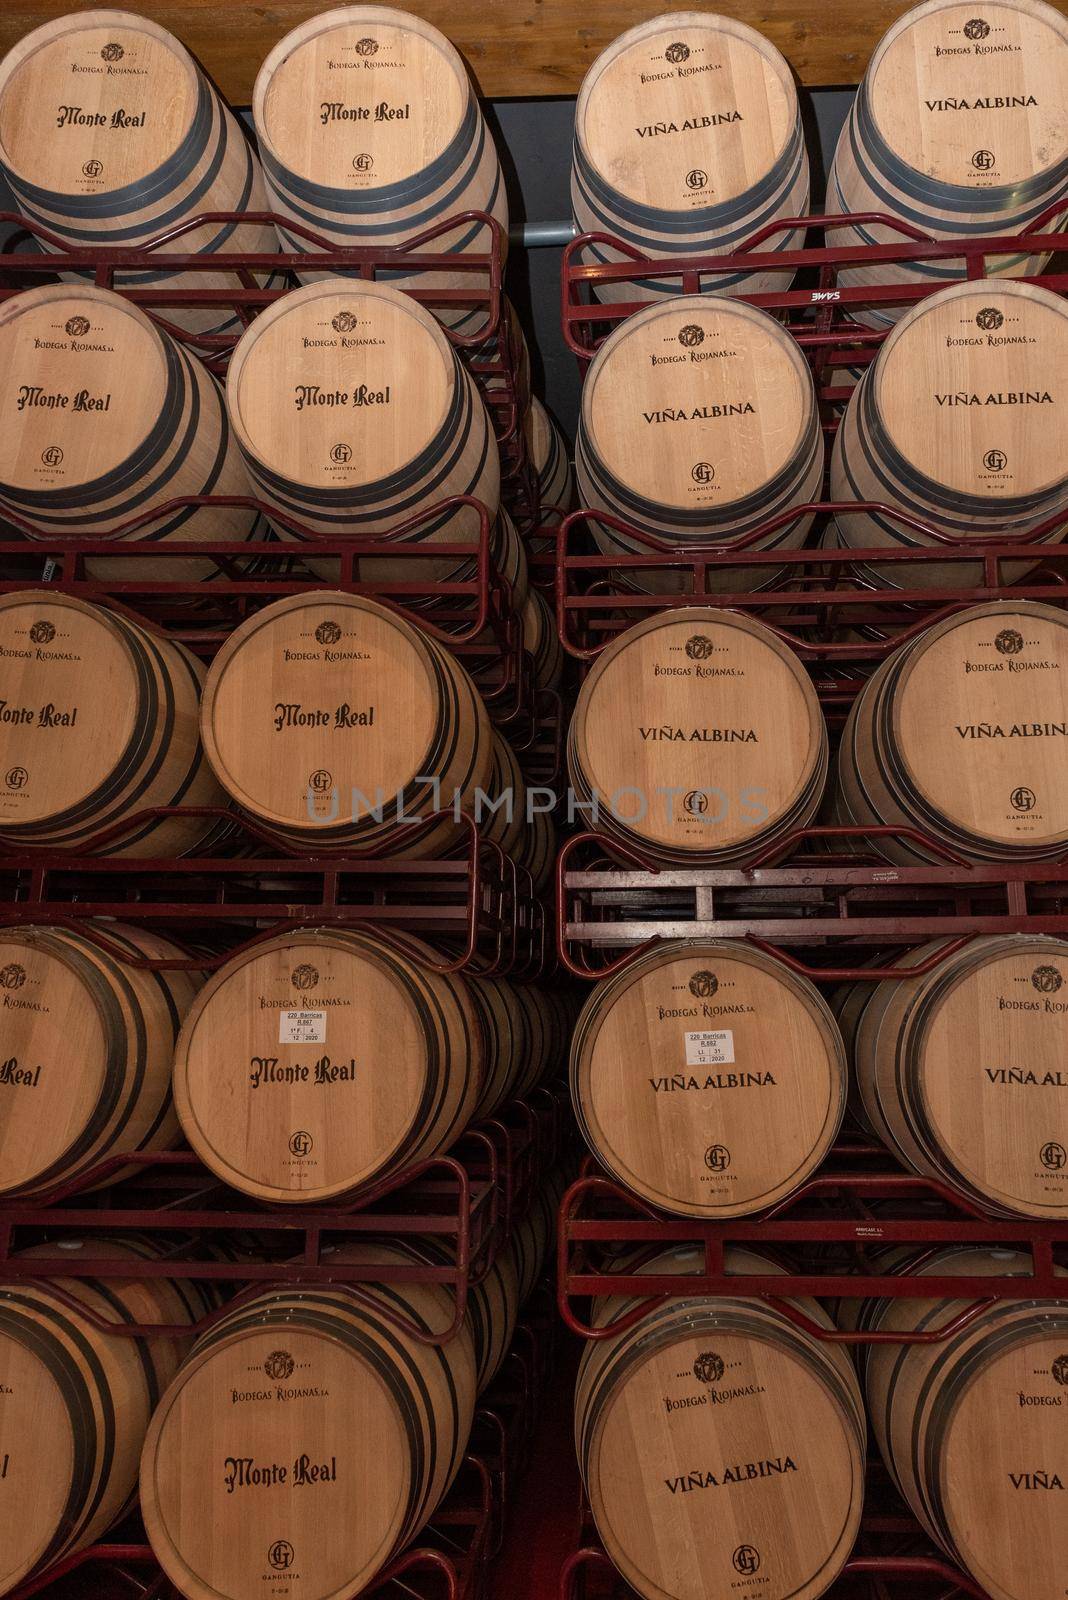 Logroño, Spain: 2021 April 26: Interior of the Bodegas Riojanas Winery on cloudy day in the city of Cenicero in Spain.